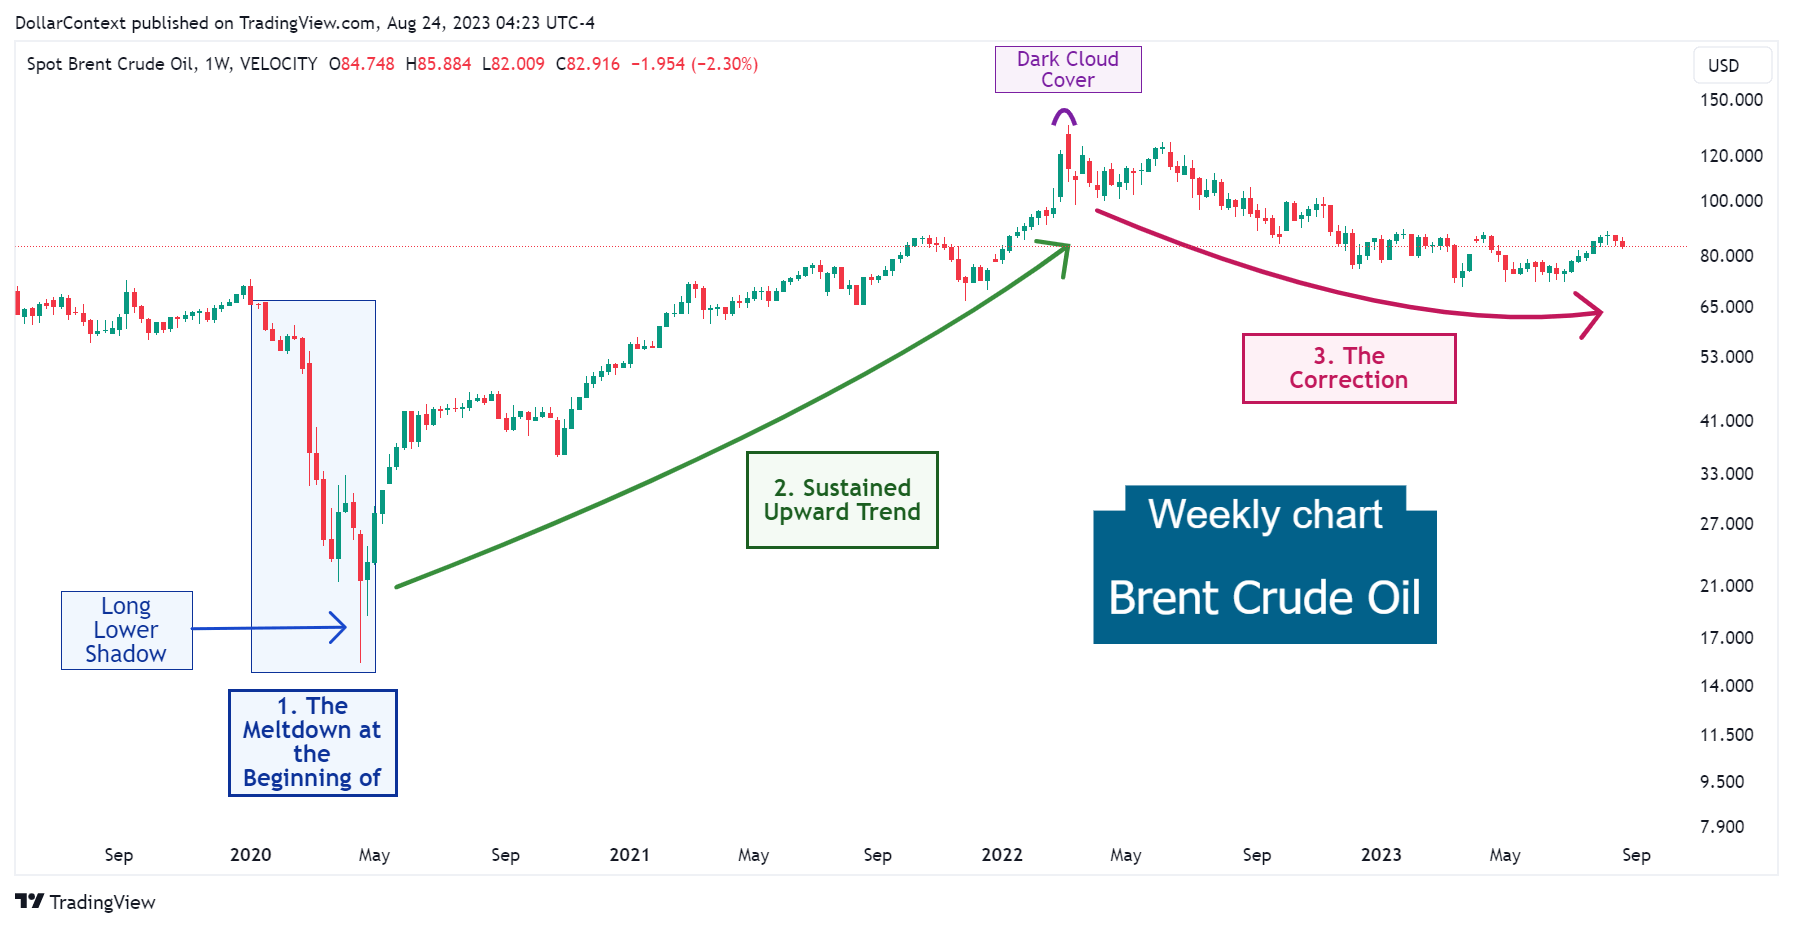 Brent Crude Oil: The Correction During the Tightening Cycle (Weekly Chart)